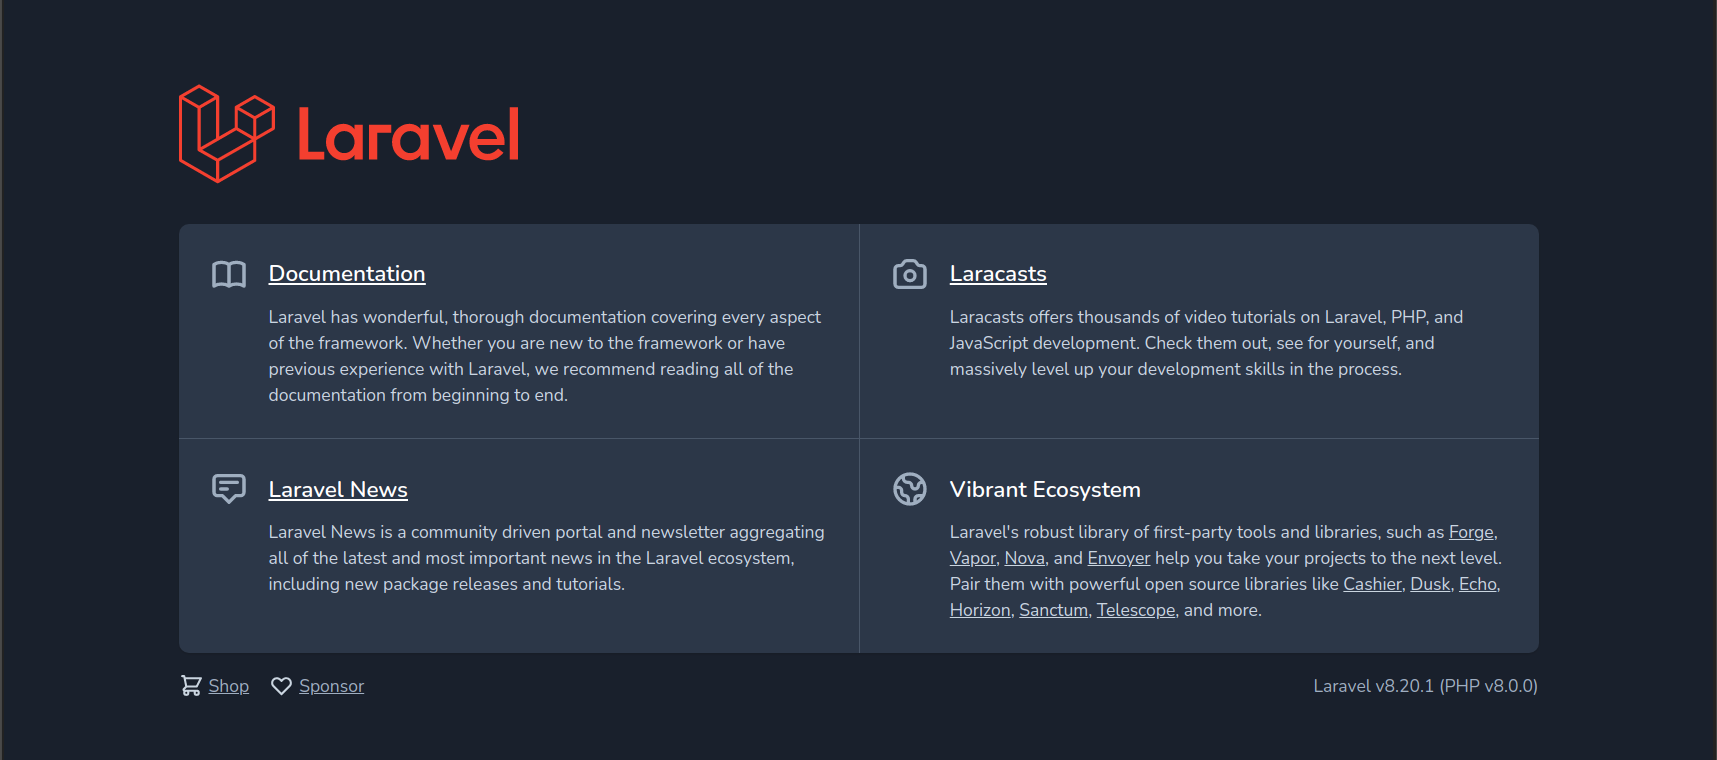 laravel-firstview.png